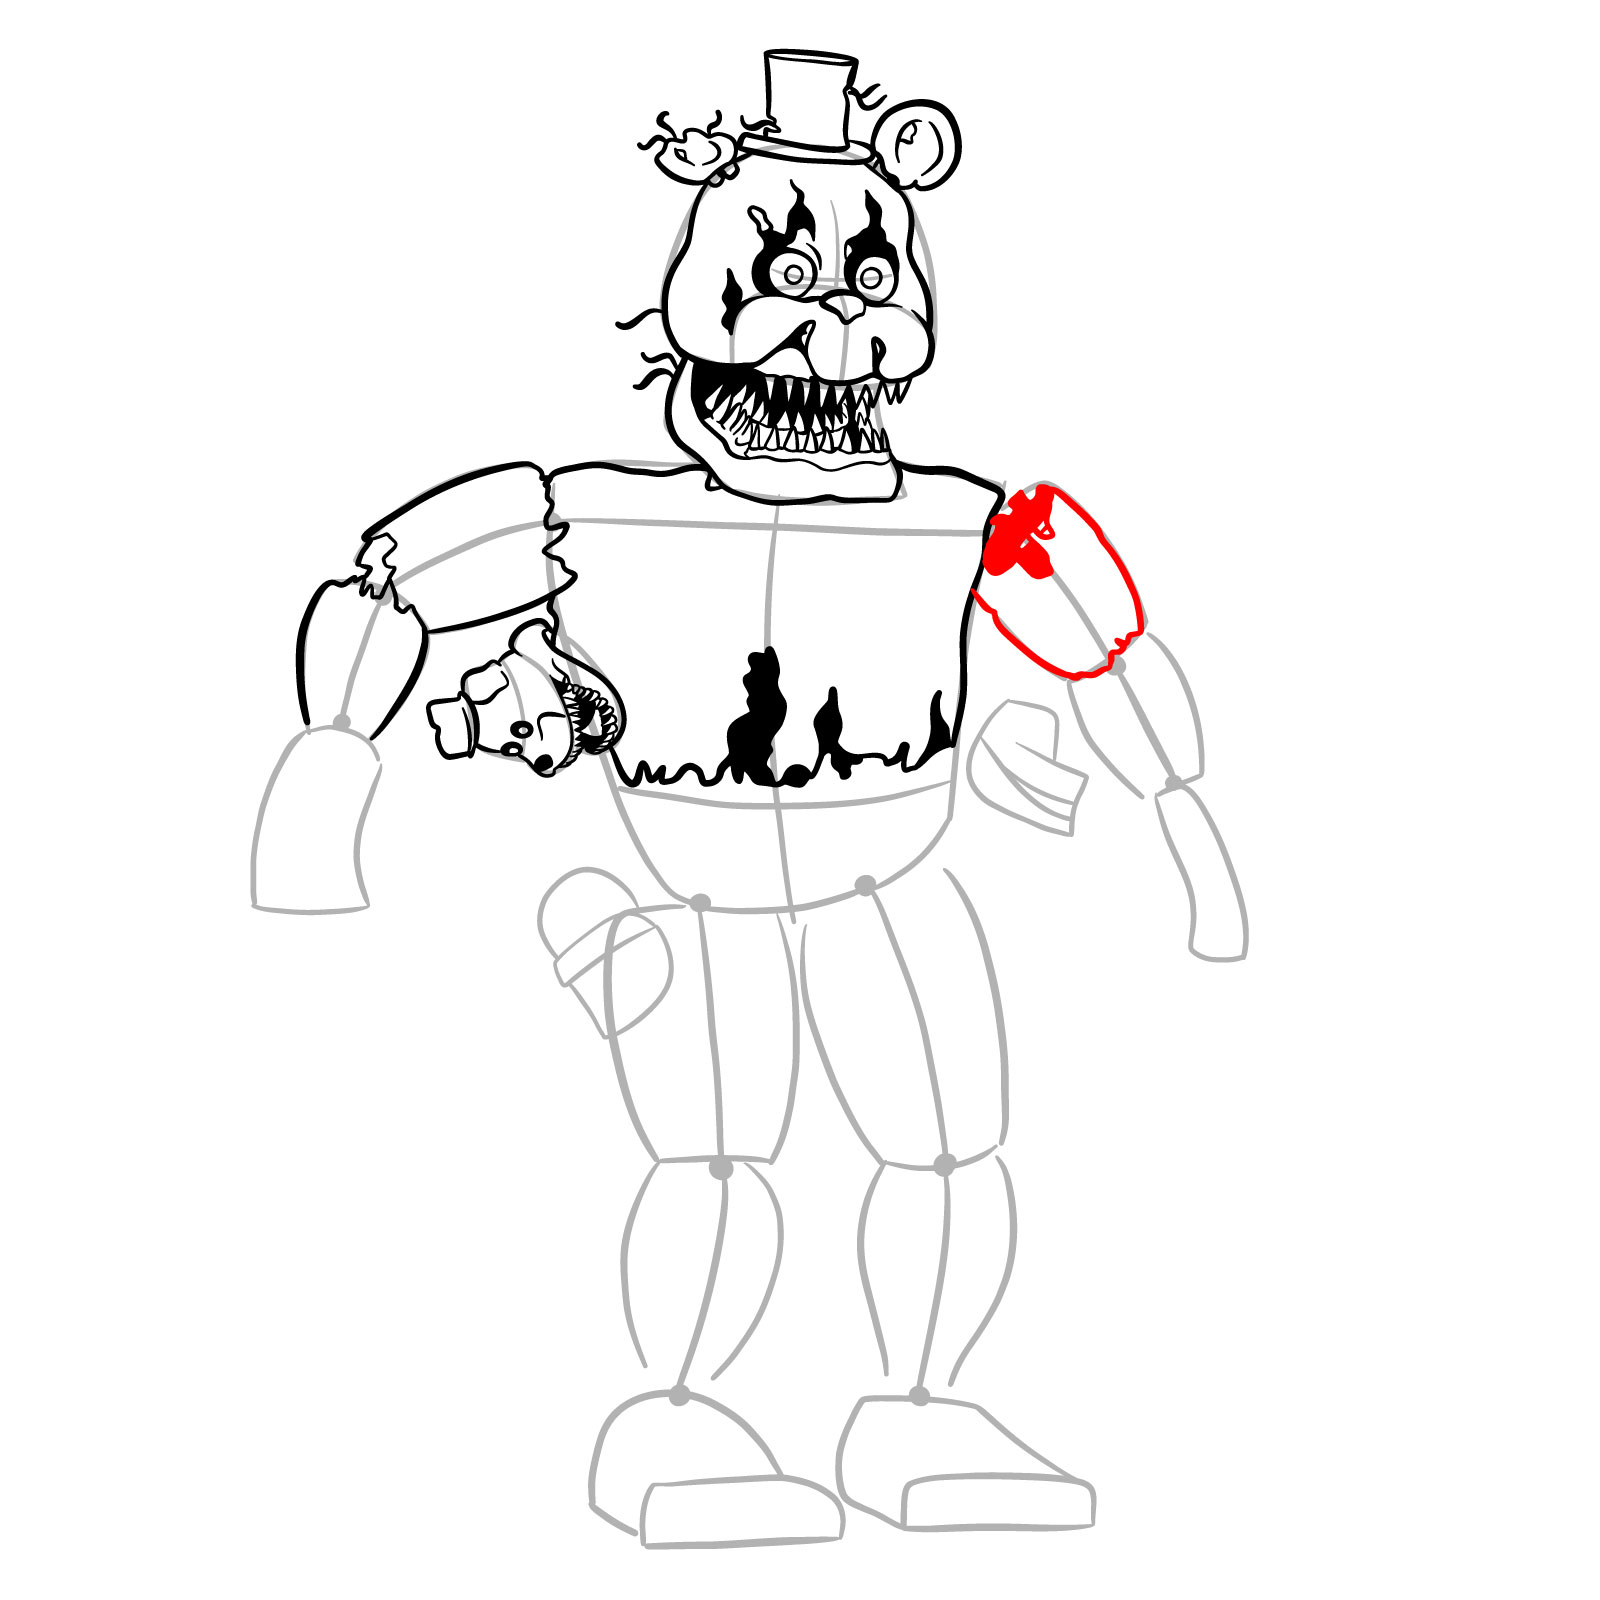 How to draw Nightmare Freddy - step 24